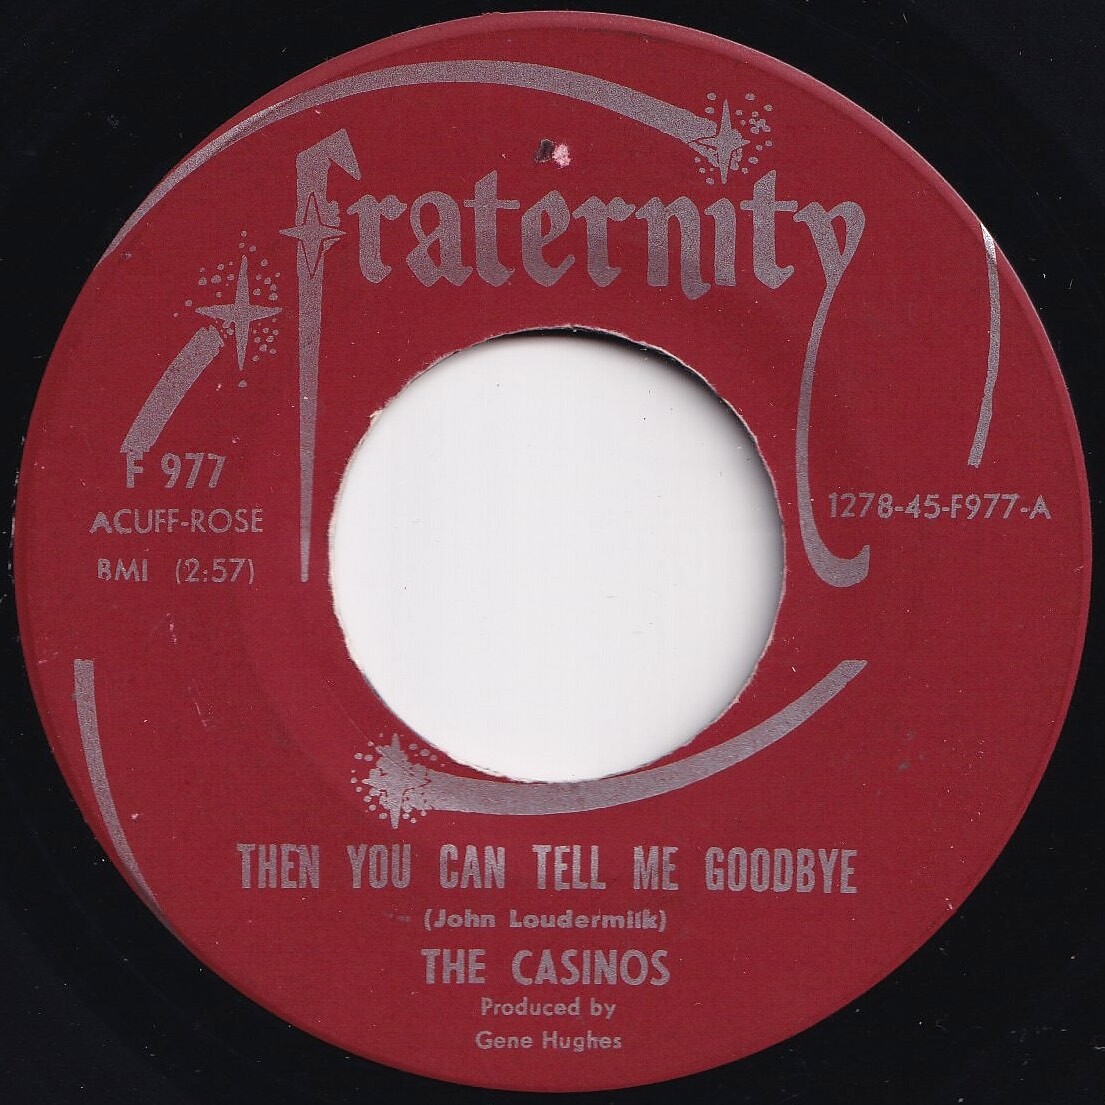 Casinos Then You Can Tell Me Goodbye / I Still Love You Fraternity US F 977 206164 R&B R&R レコード 7インチ 45の画像1